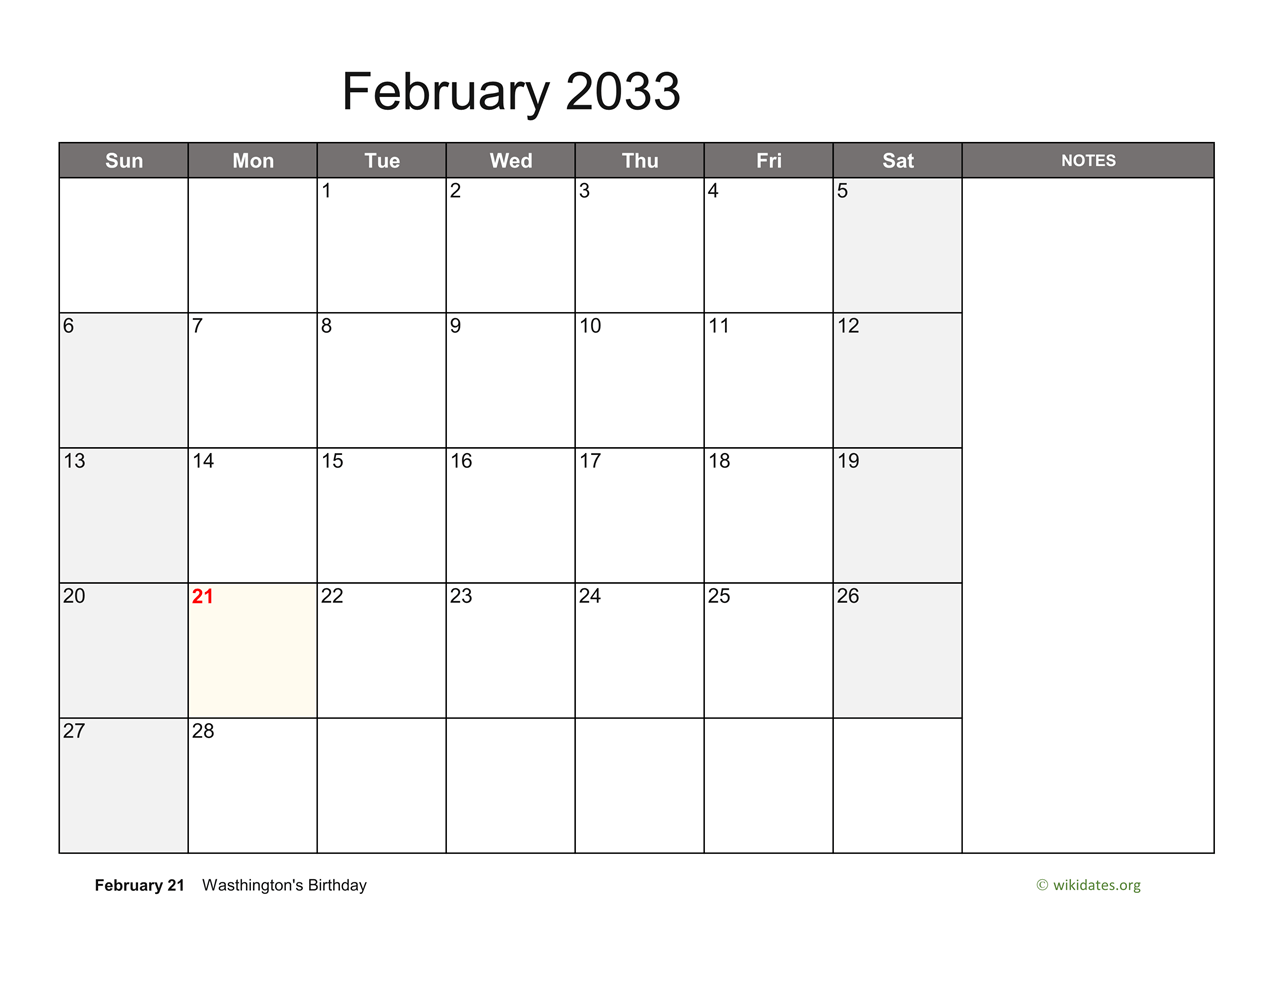 February 2033 Calendar With Notes